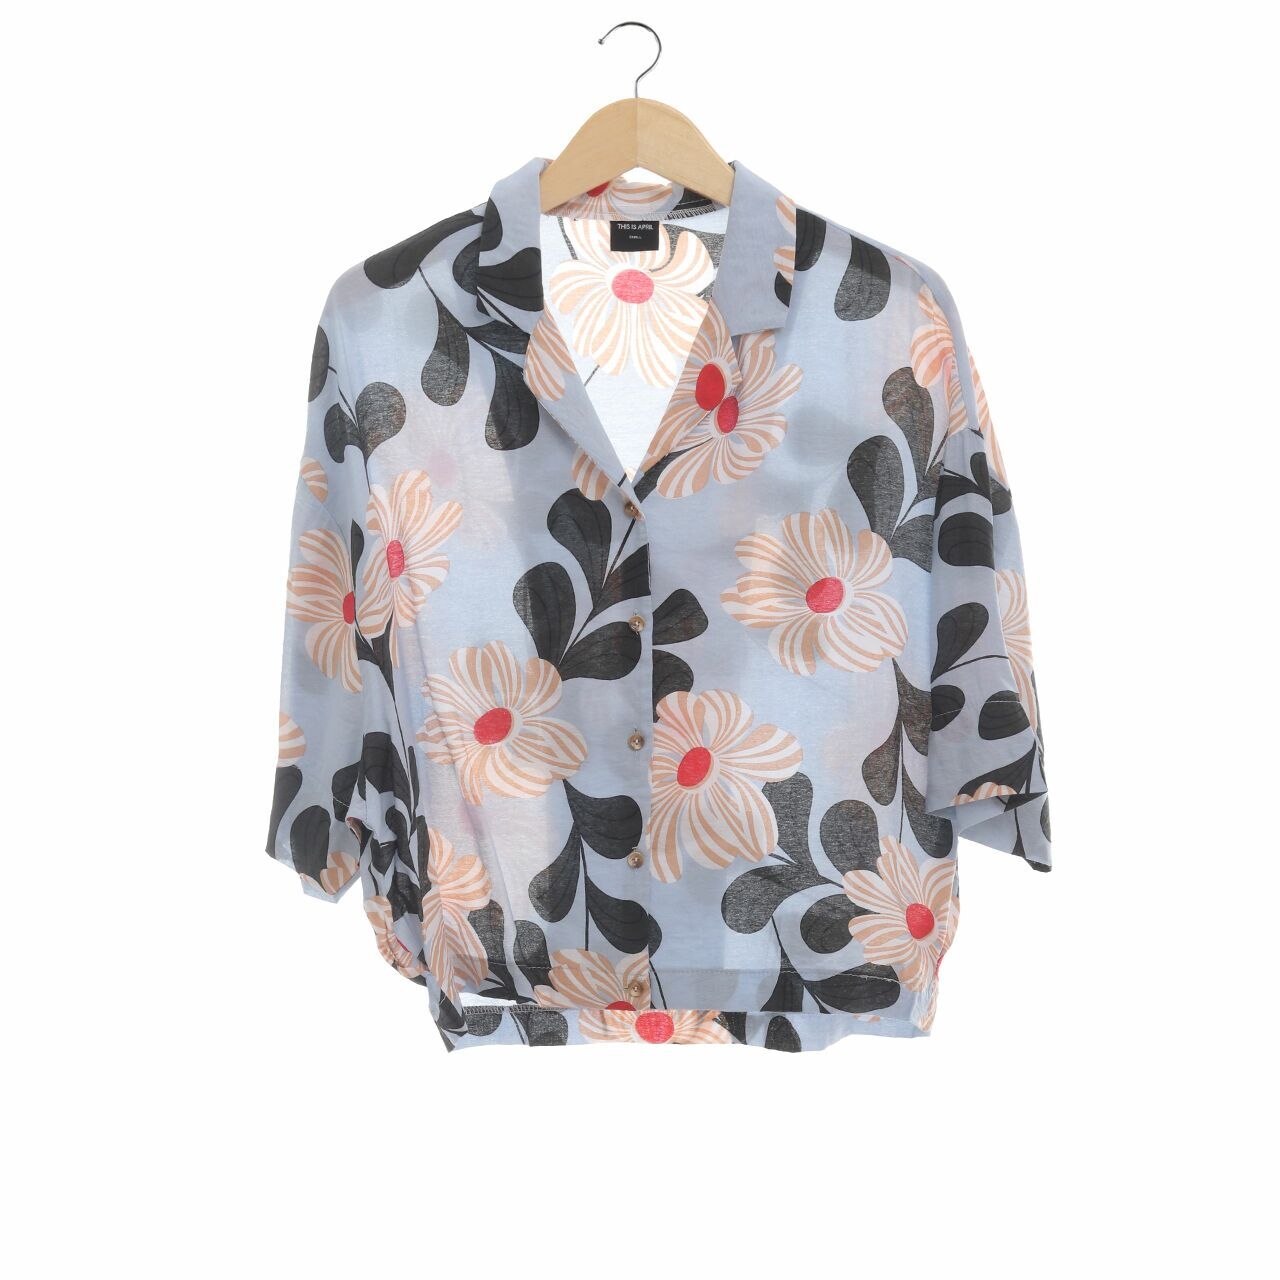 This is April Multicolor Shirt